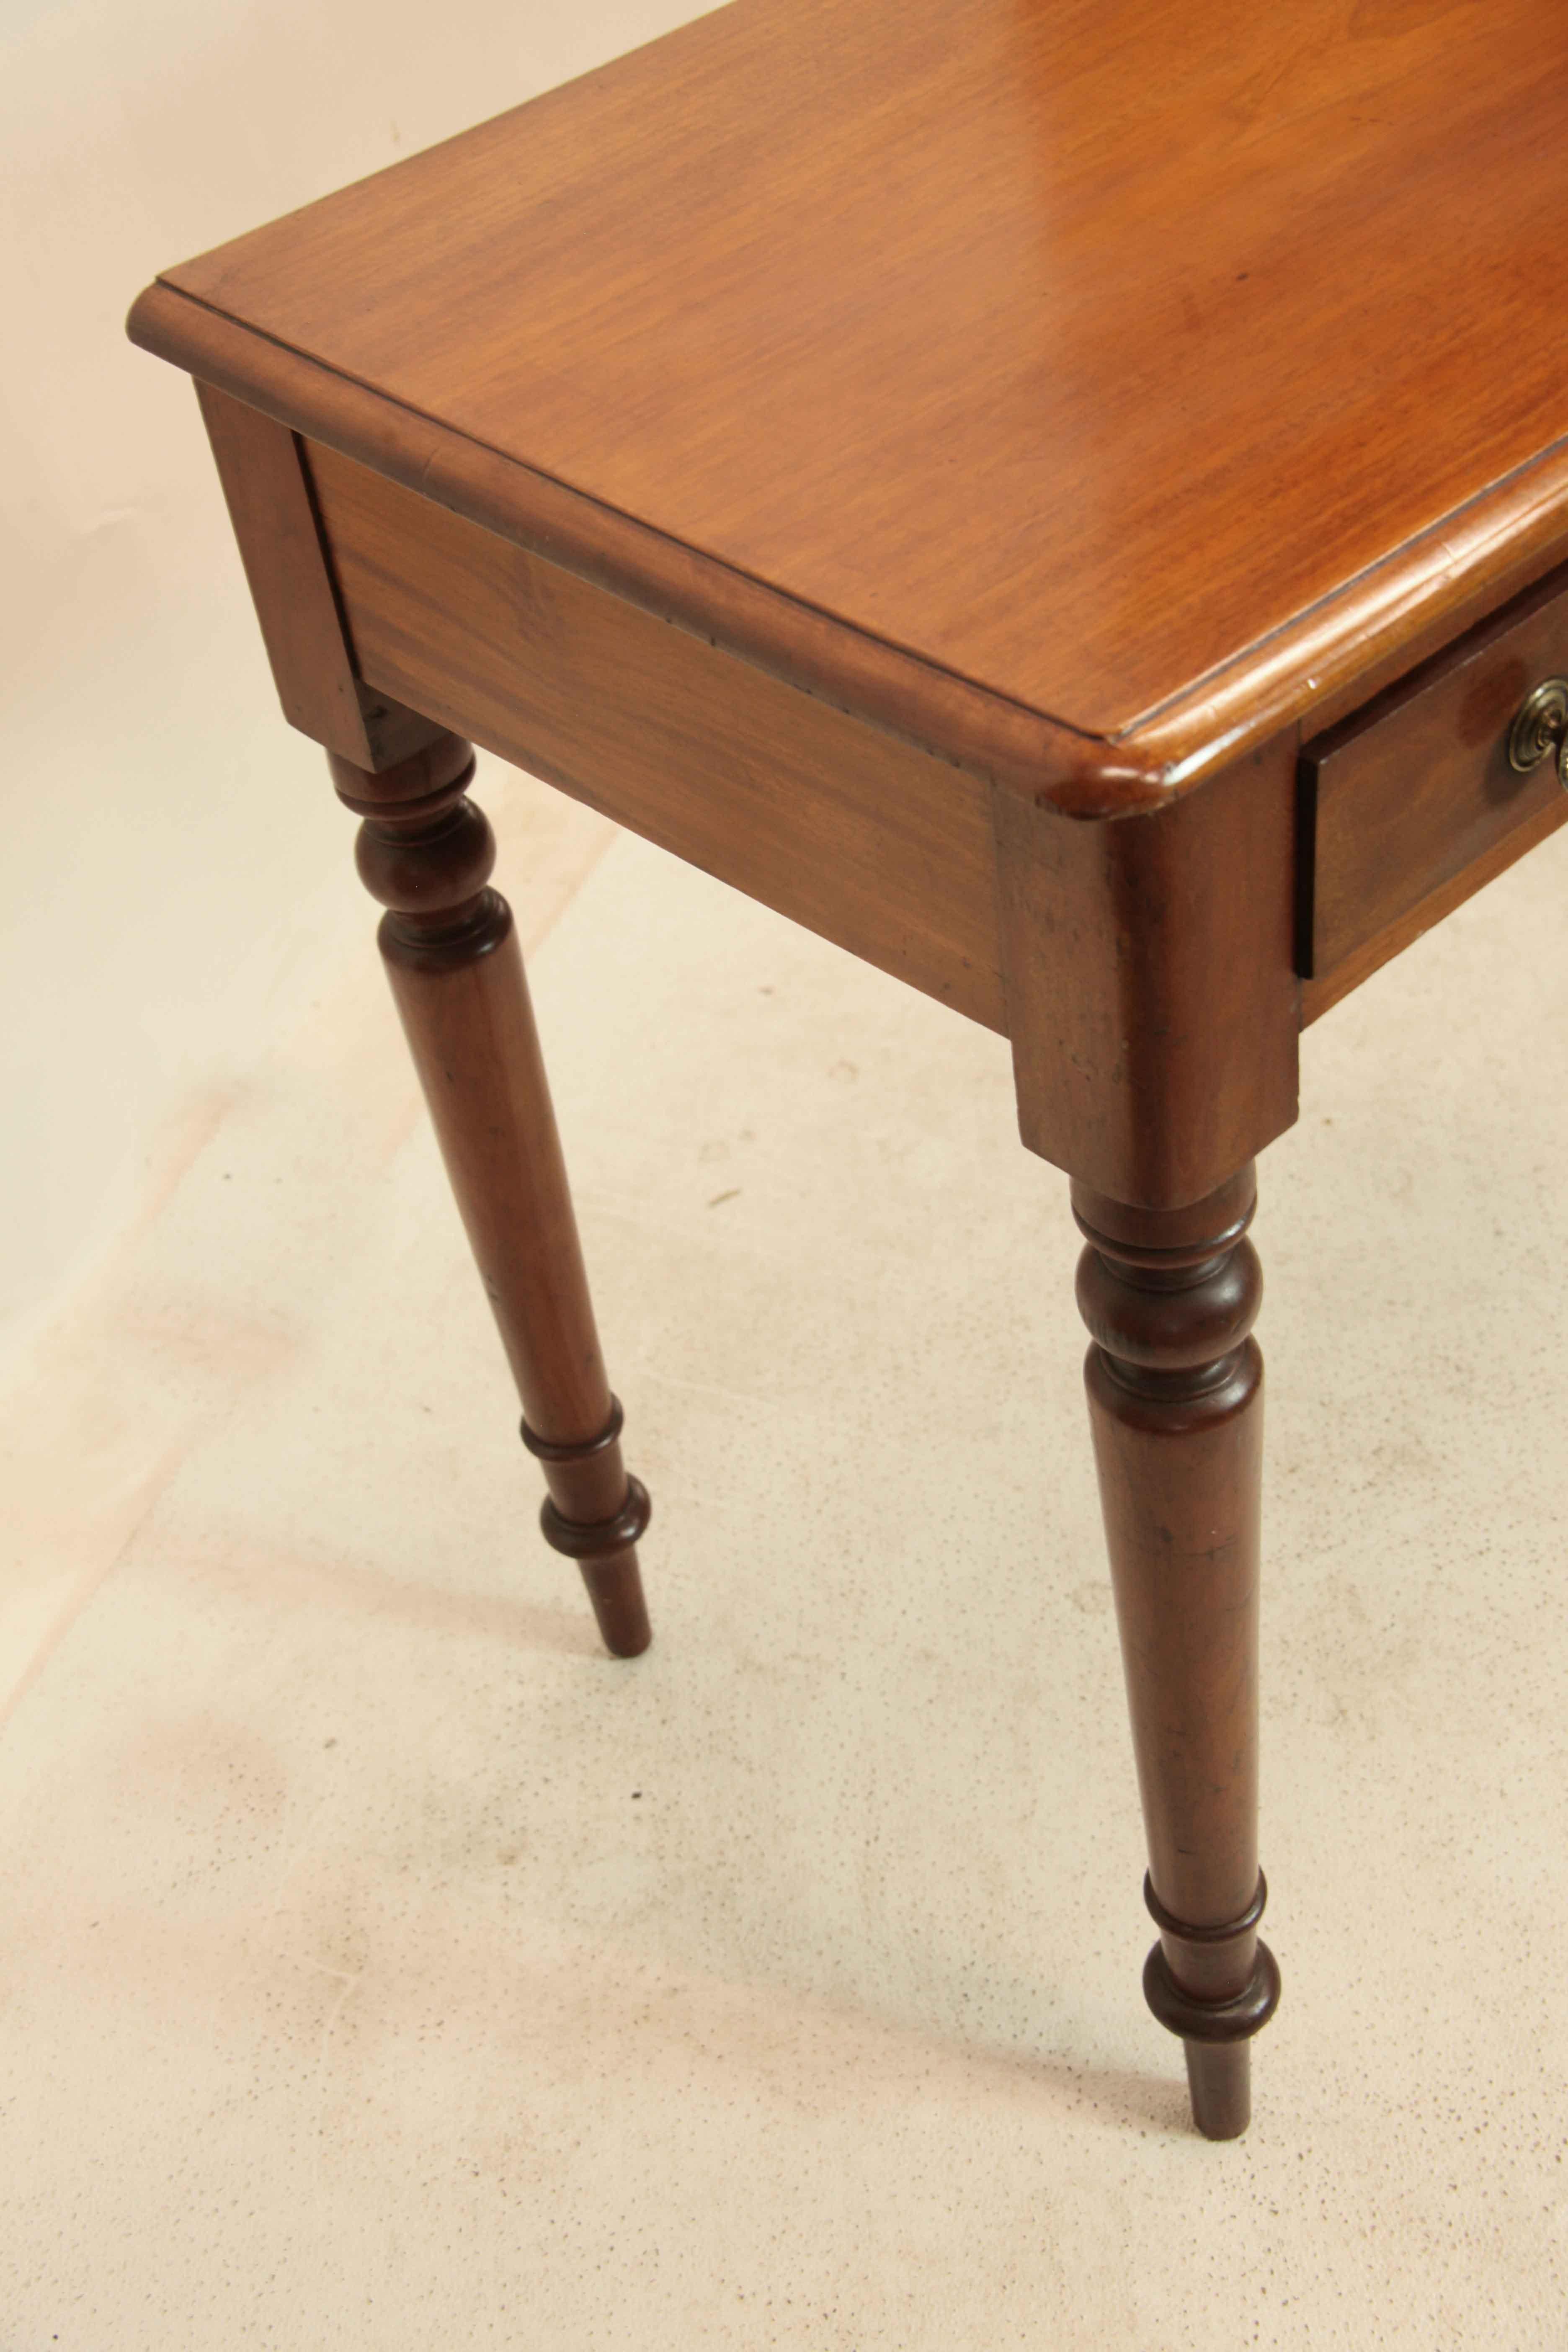 English mahogany console table, the top with molded edge has beautiful faded color and patina over two drawers with brass knobs and escutcheons, right hand drawer fitted for cutlery( needs new felt). mahogany secondary wood ; the legs are nicely